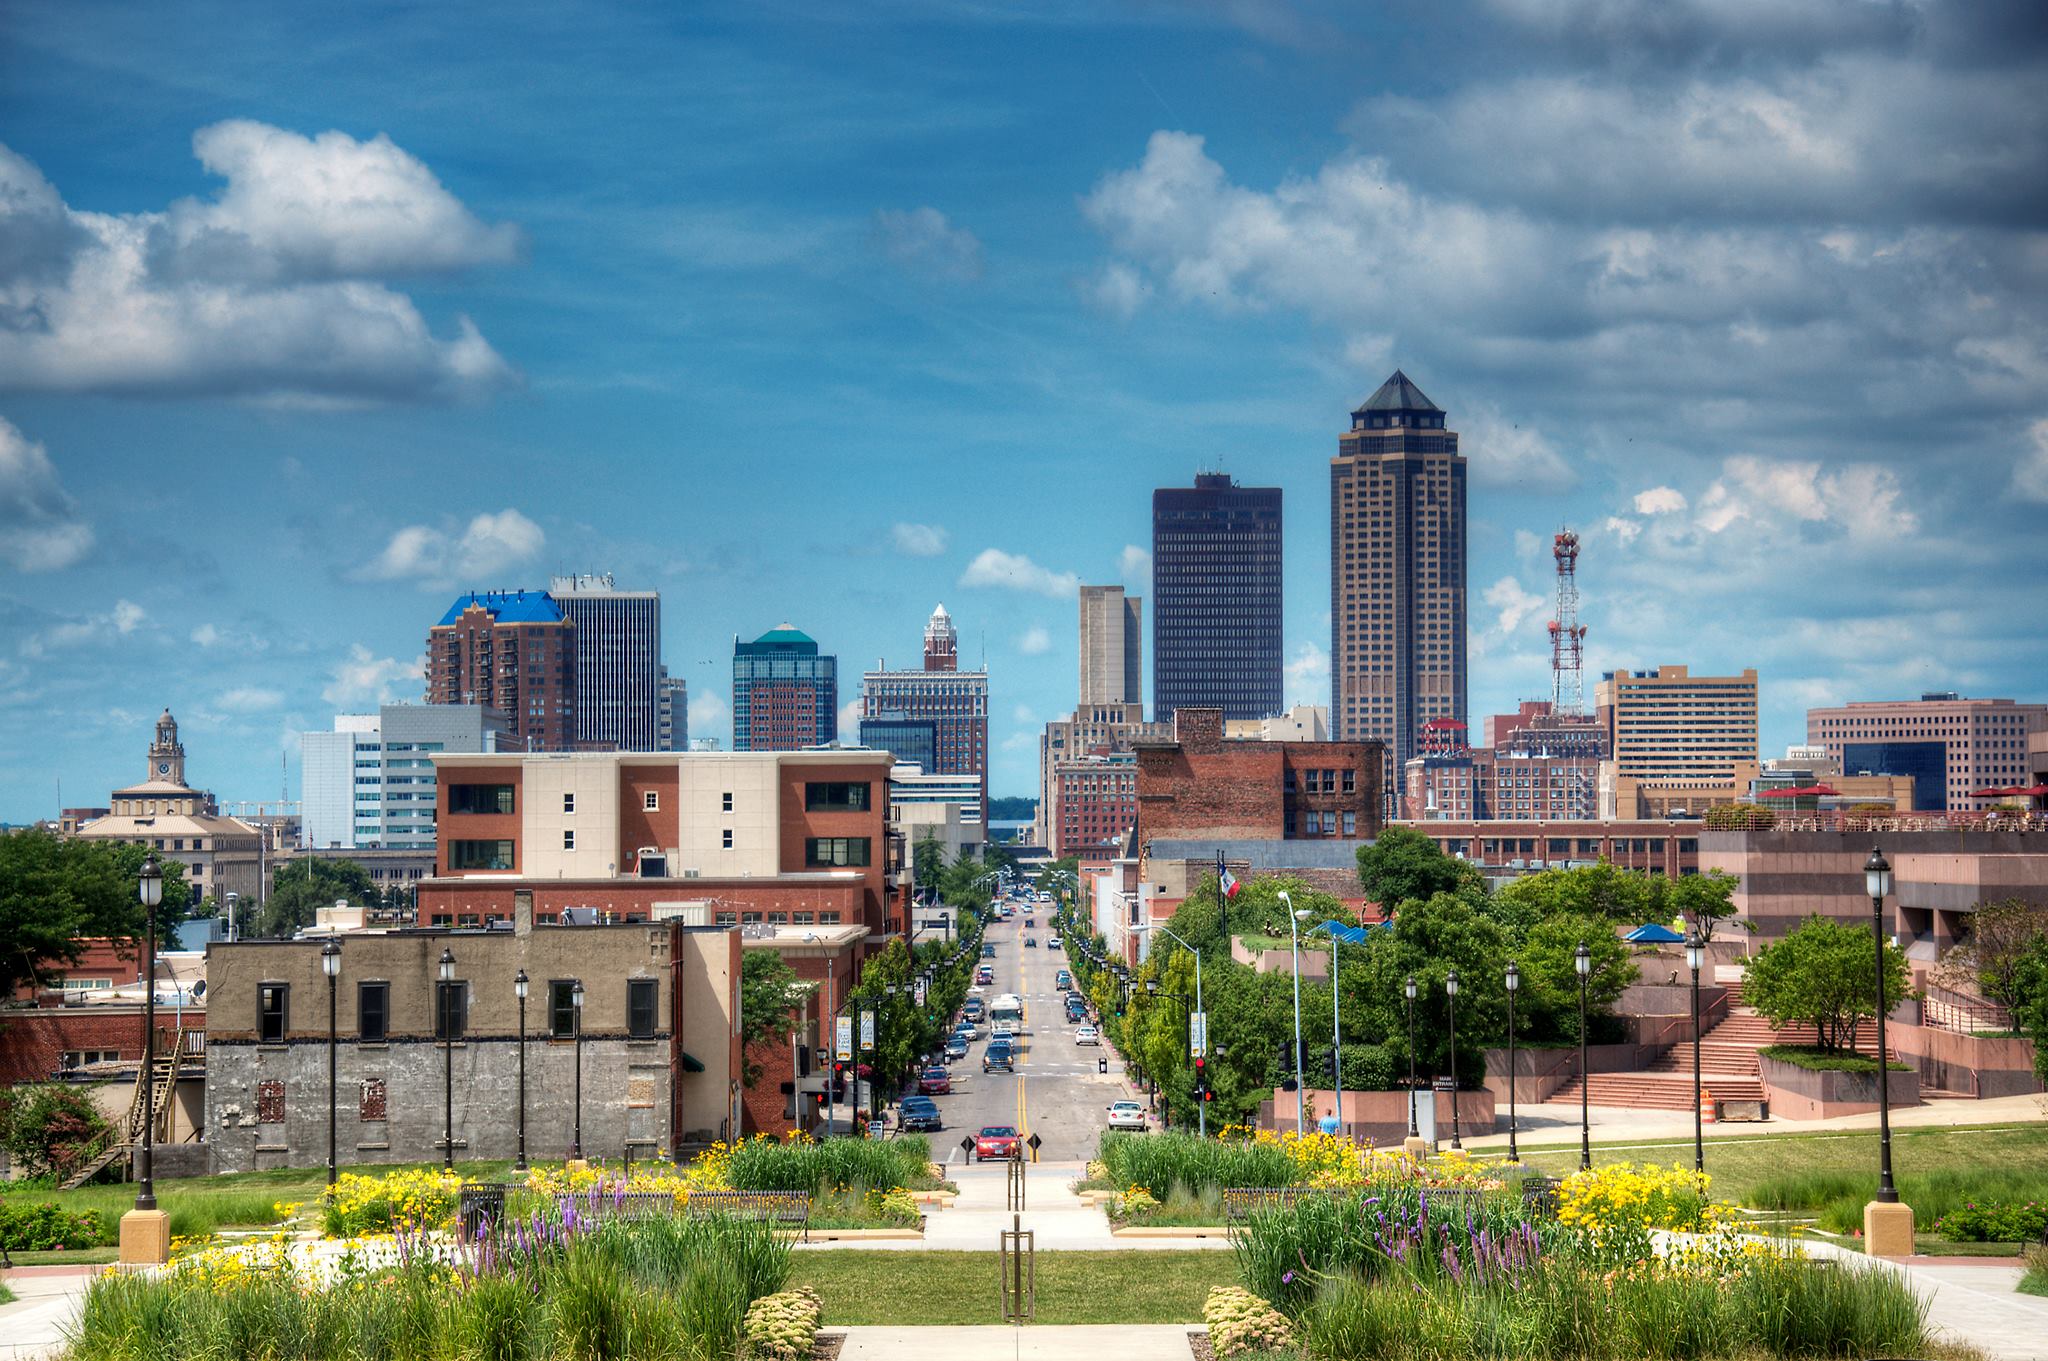 Des Moines is home to 200,000 people. It is the largest city in Iowa.